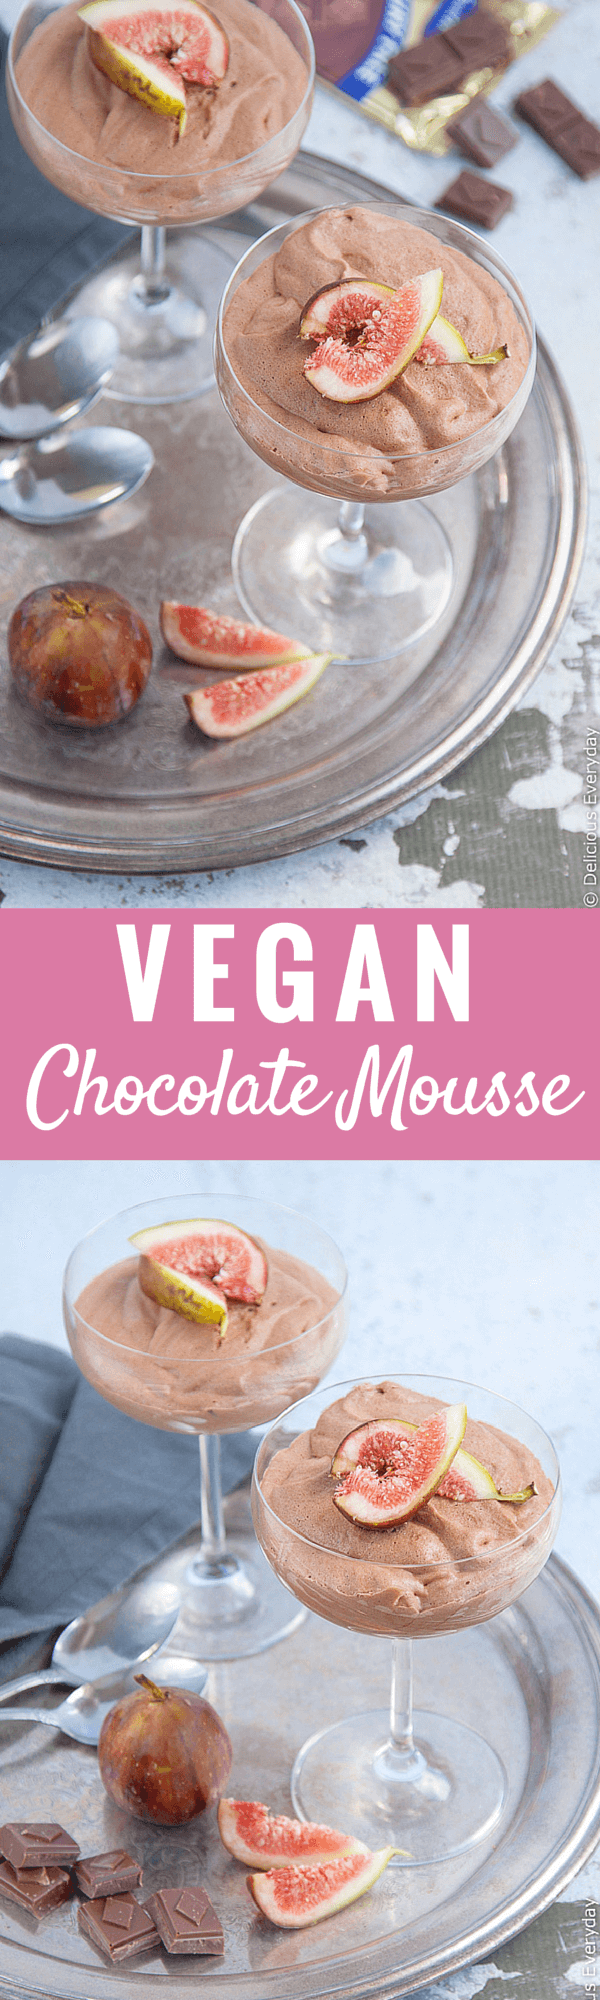 Get the recipe for this unbelievably light and fluffy VEGAN chocolate mousse. You'll never guess the secret ingredient, and it's one you probably already have in your pantry! | Click for the recipe